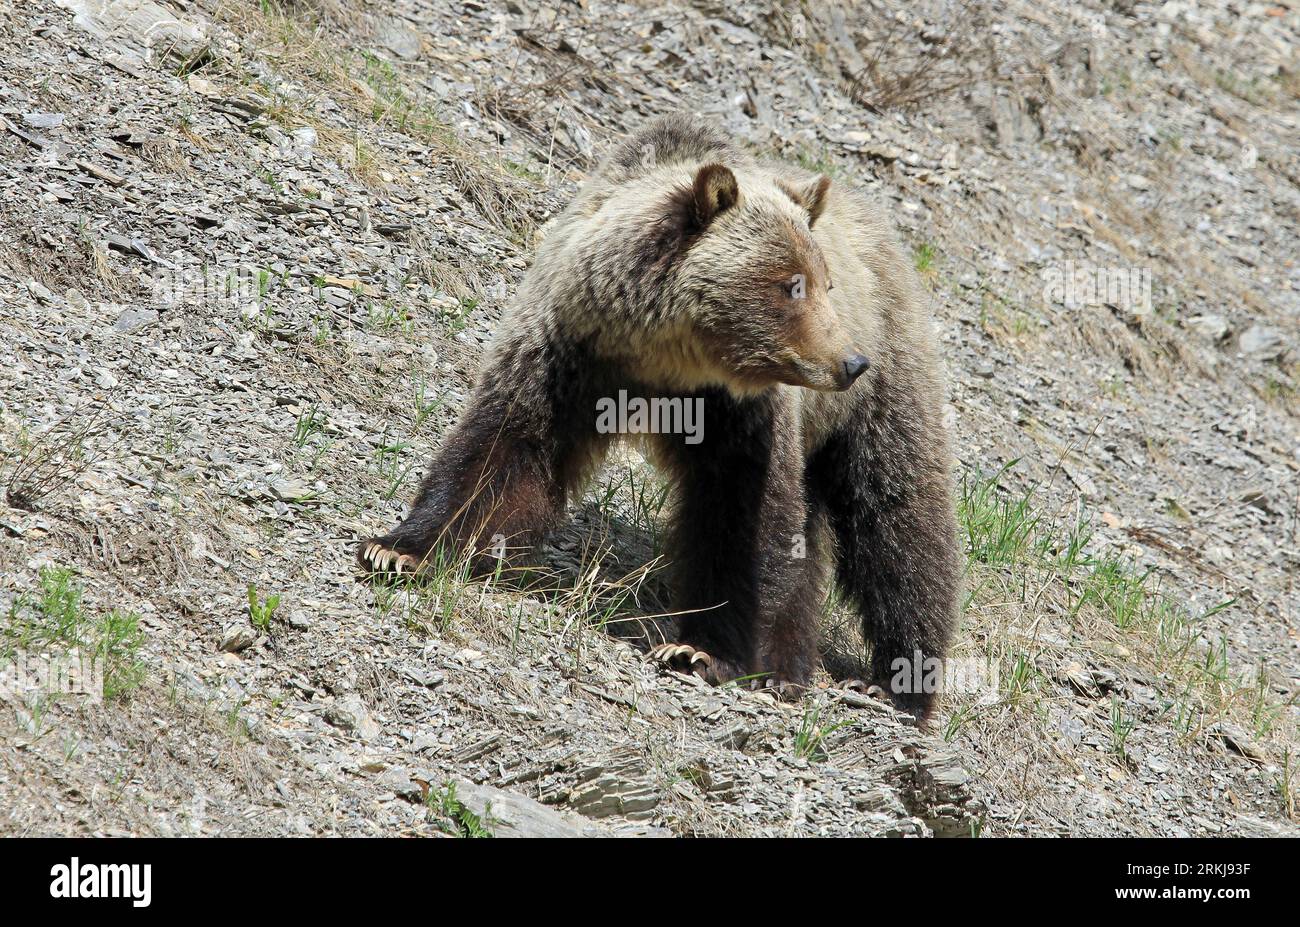 Mama grizzly waiting for her cubs - Canada Stock Photo